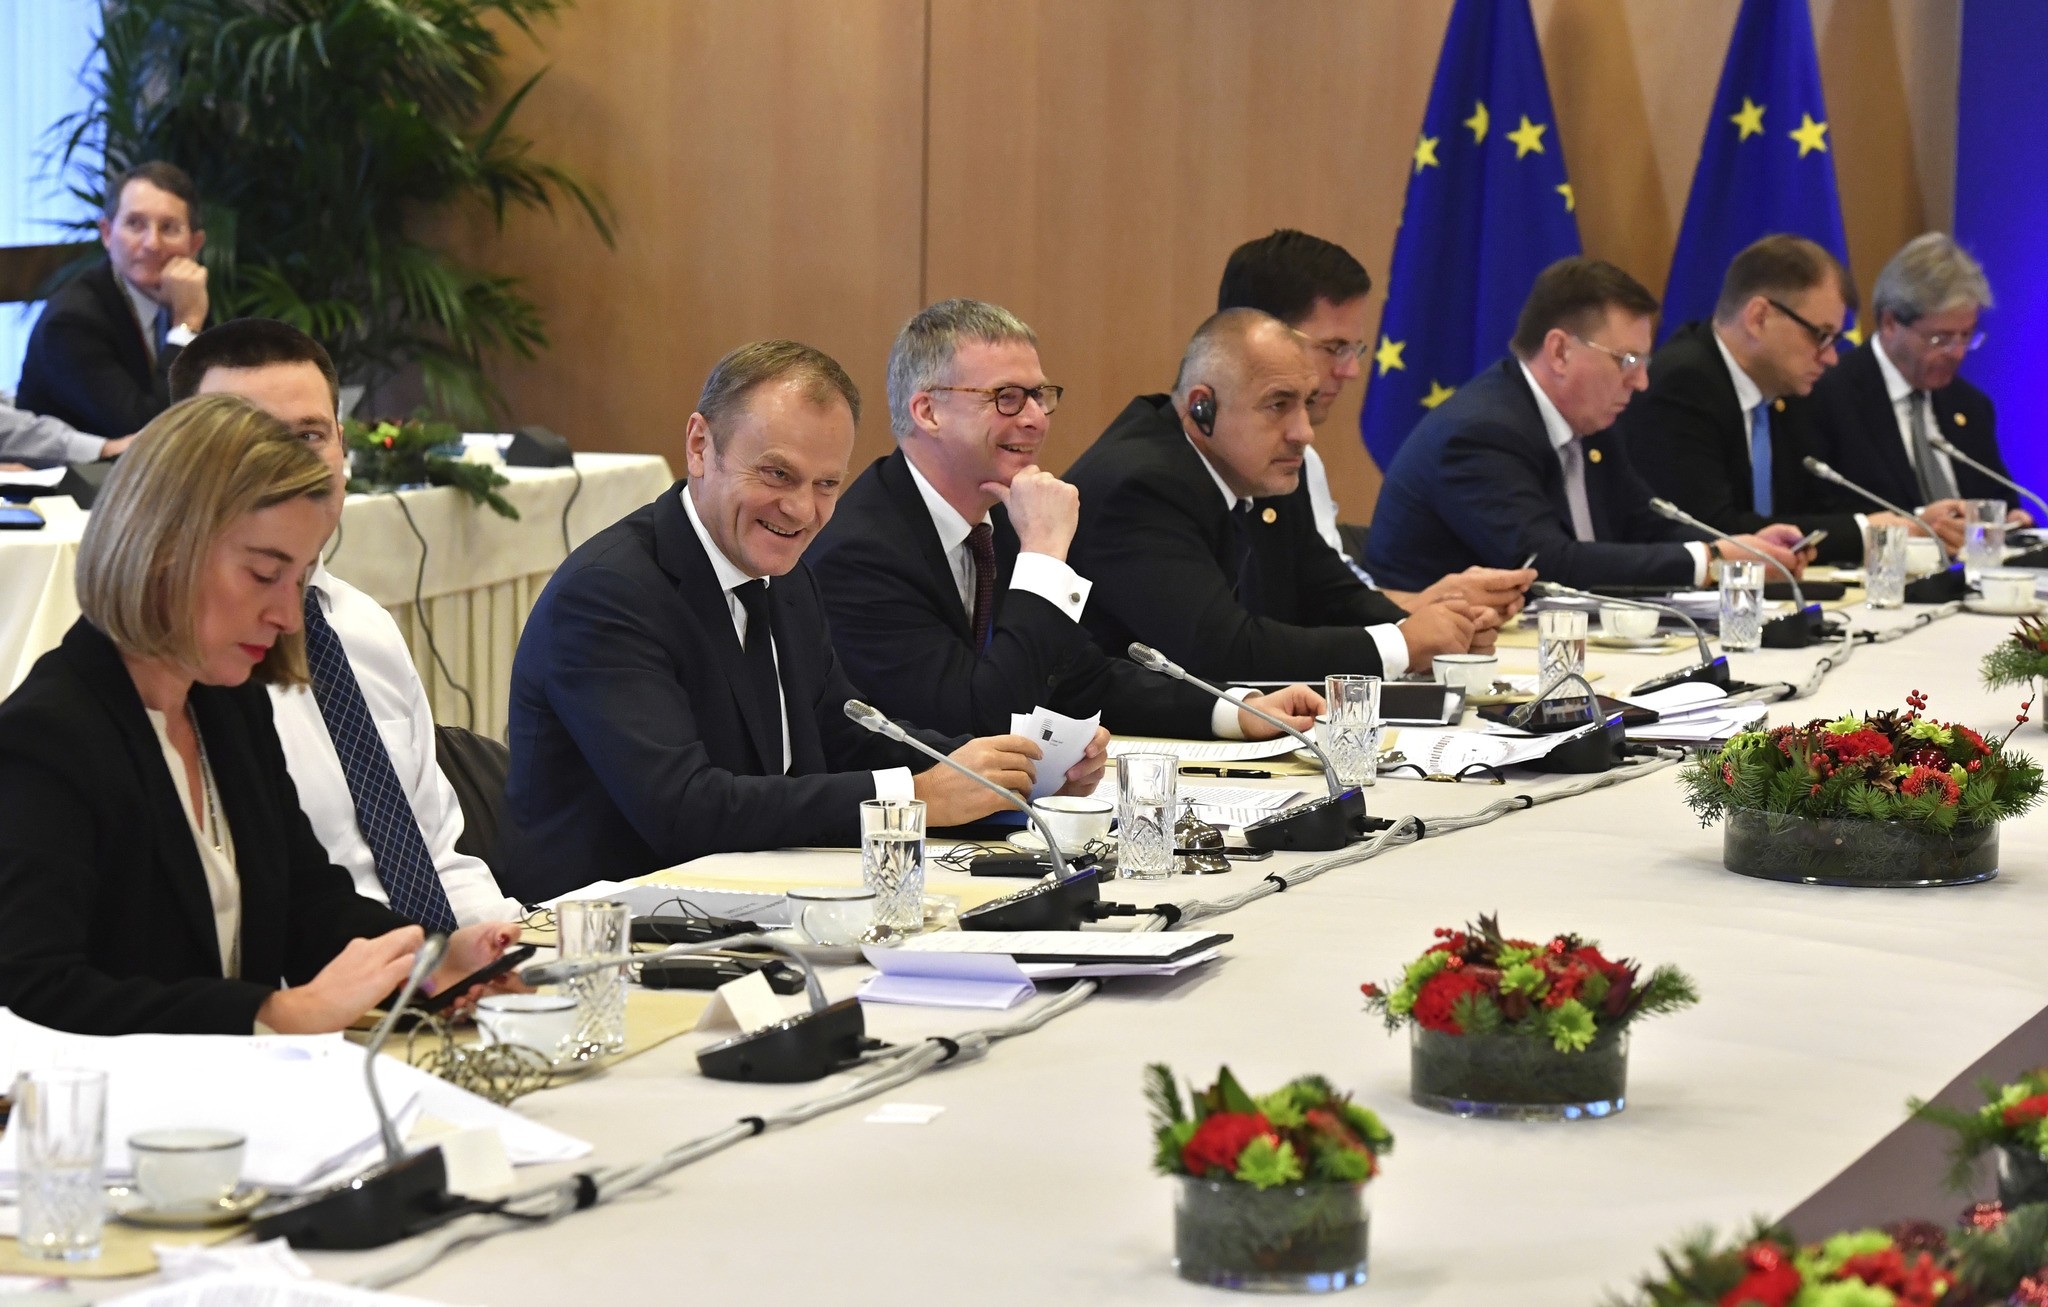 European Council President Donald Tusk, third left, participates in a round table meeting regarding Article 50 at an EU summit in Brussels on Friday, Dec. 15, 2017. (AP Photo)